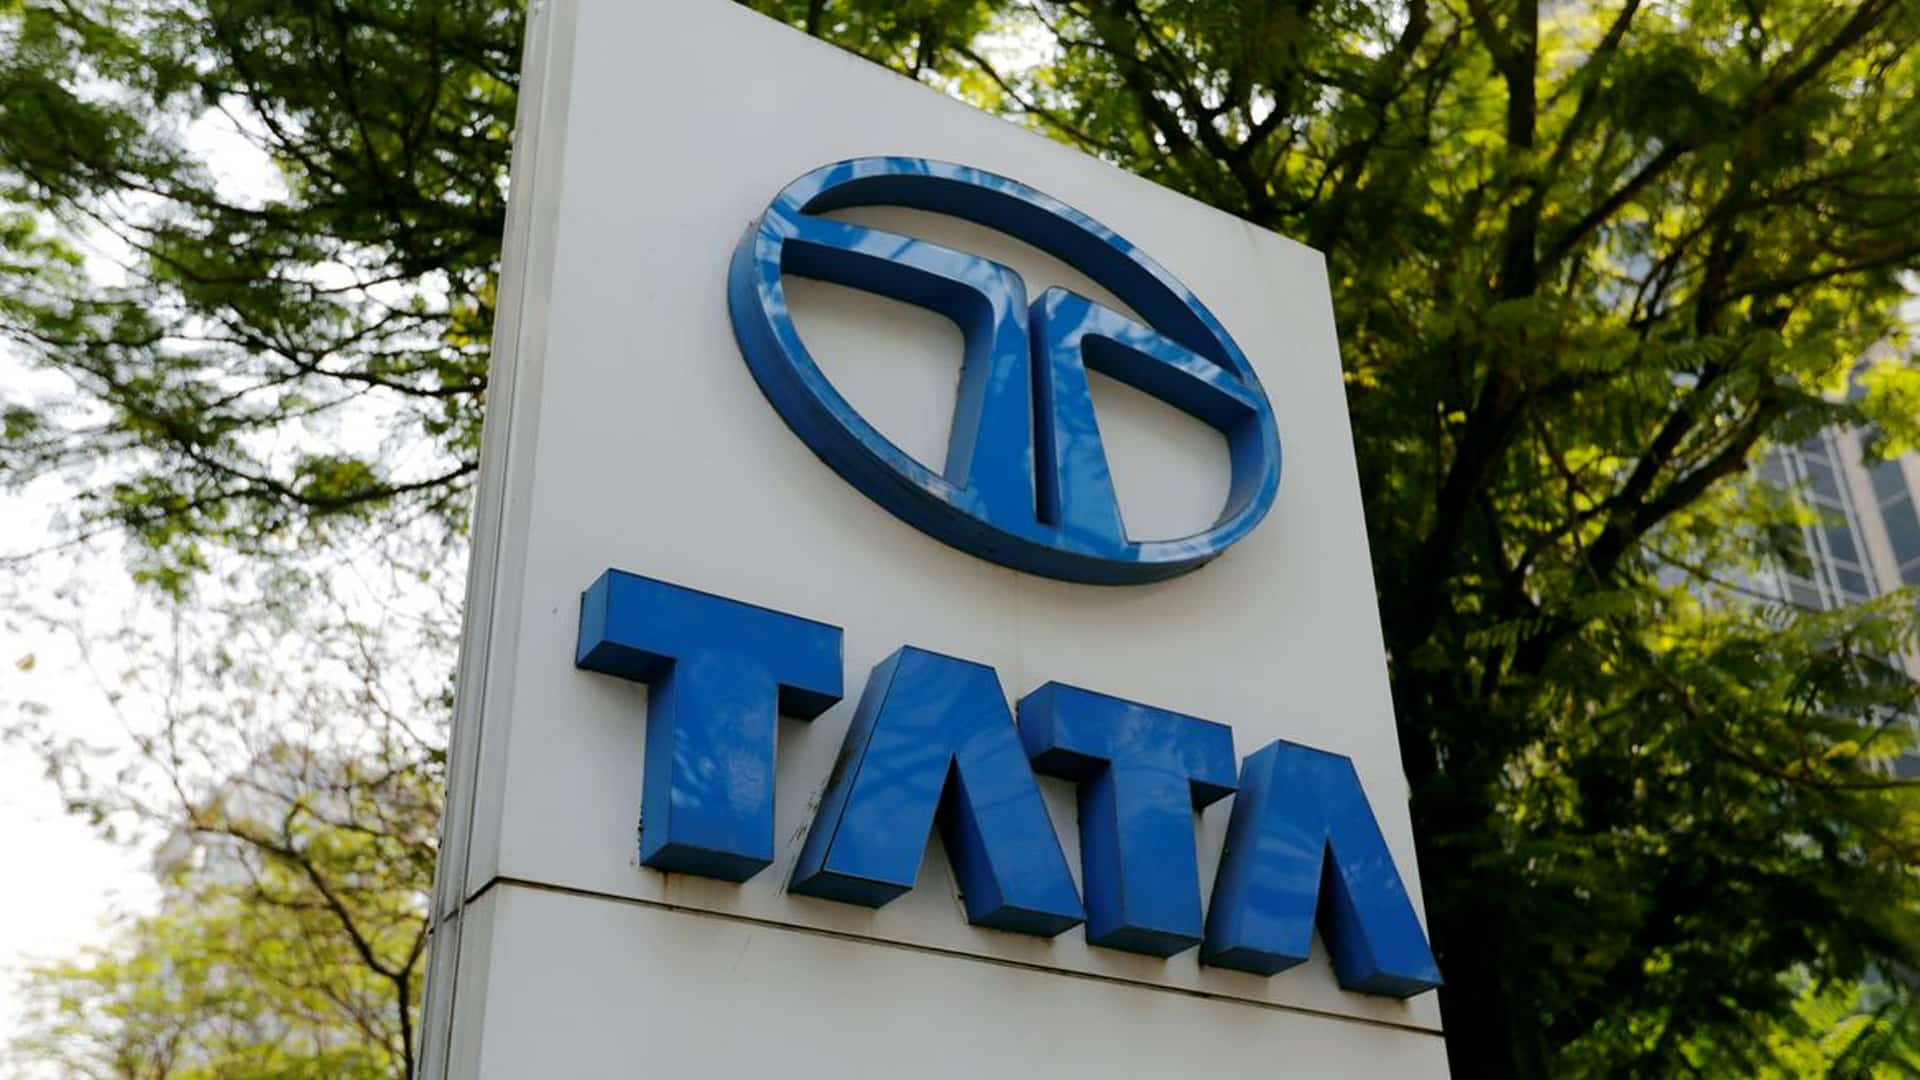 Tata group aiming at net-zero emission by 2045